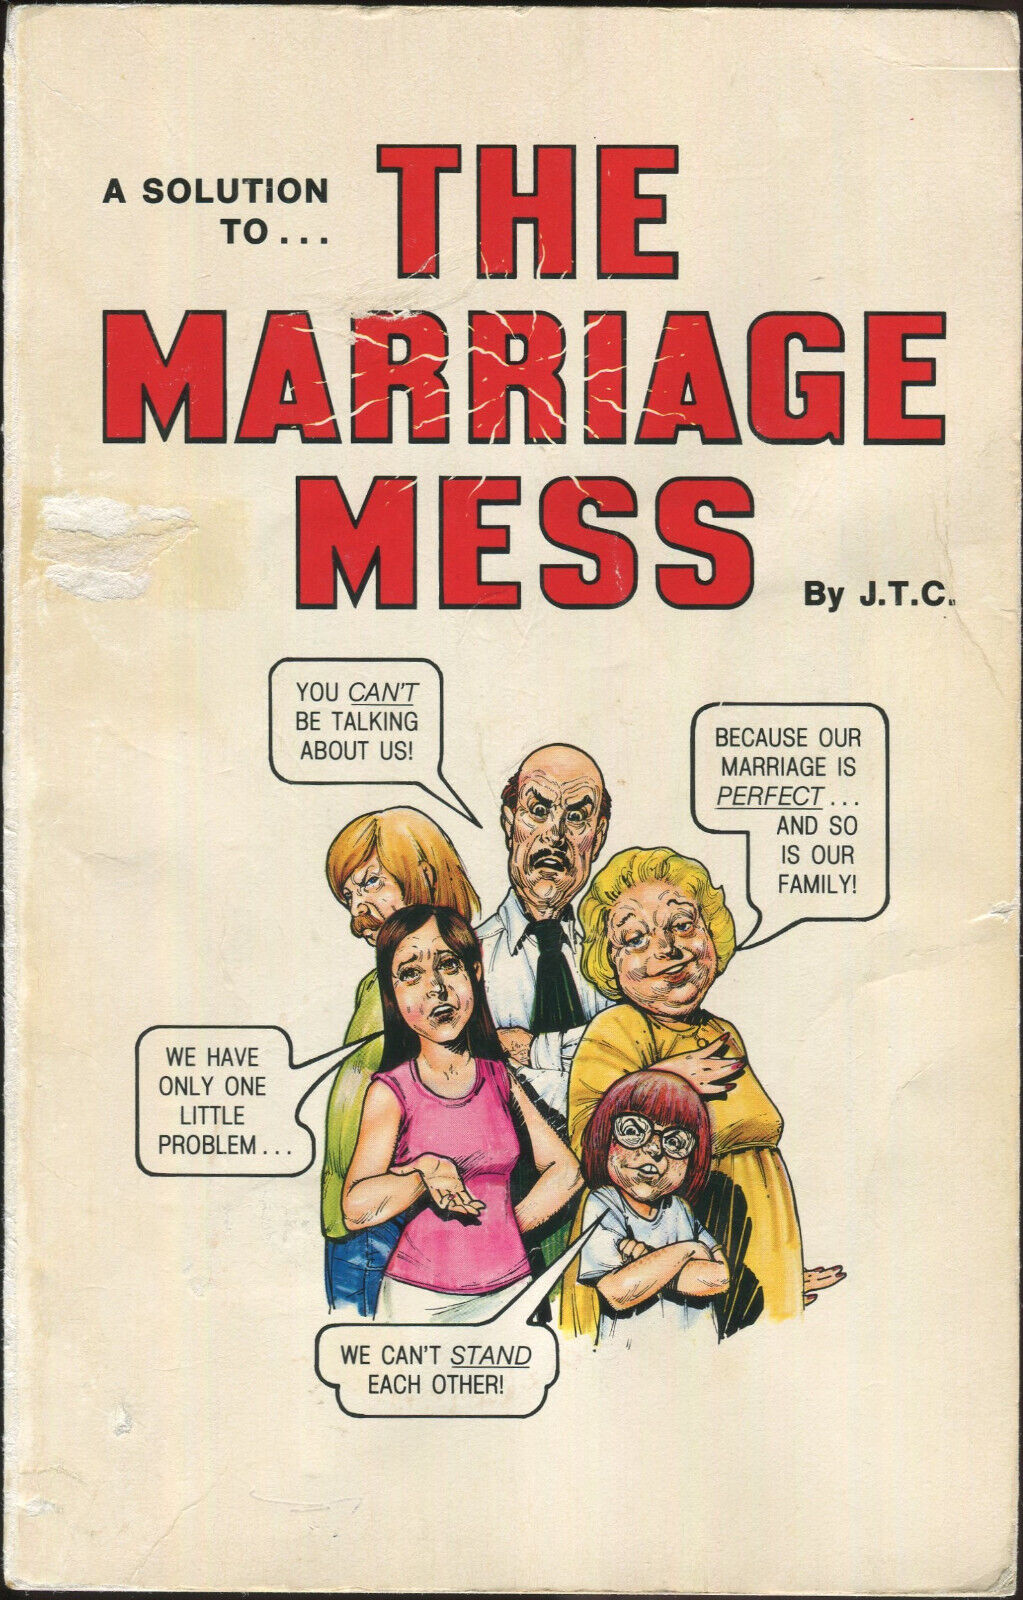 1978 The Marriage Mess Chick Publications Book & Tract Lot - Jack